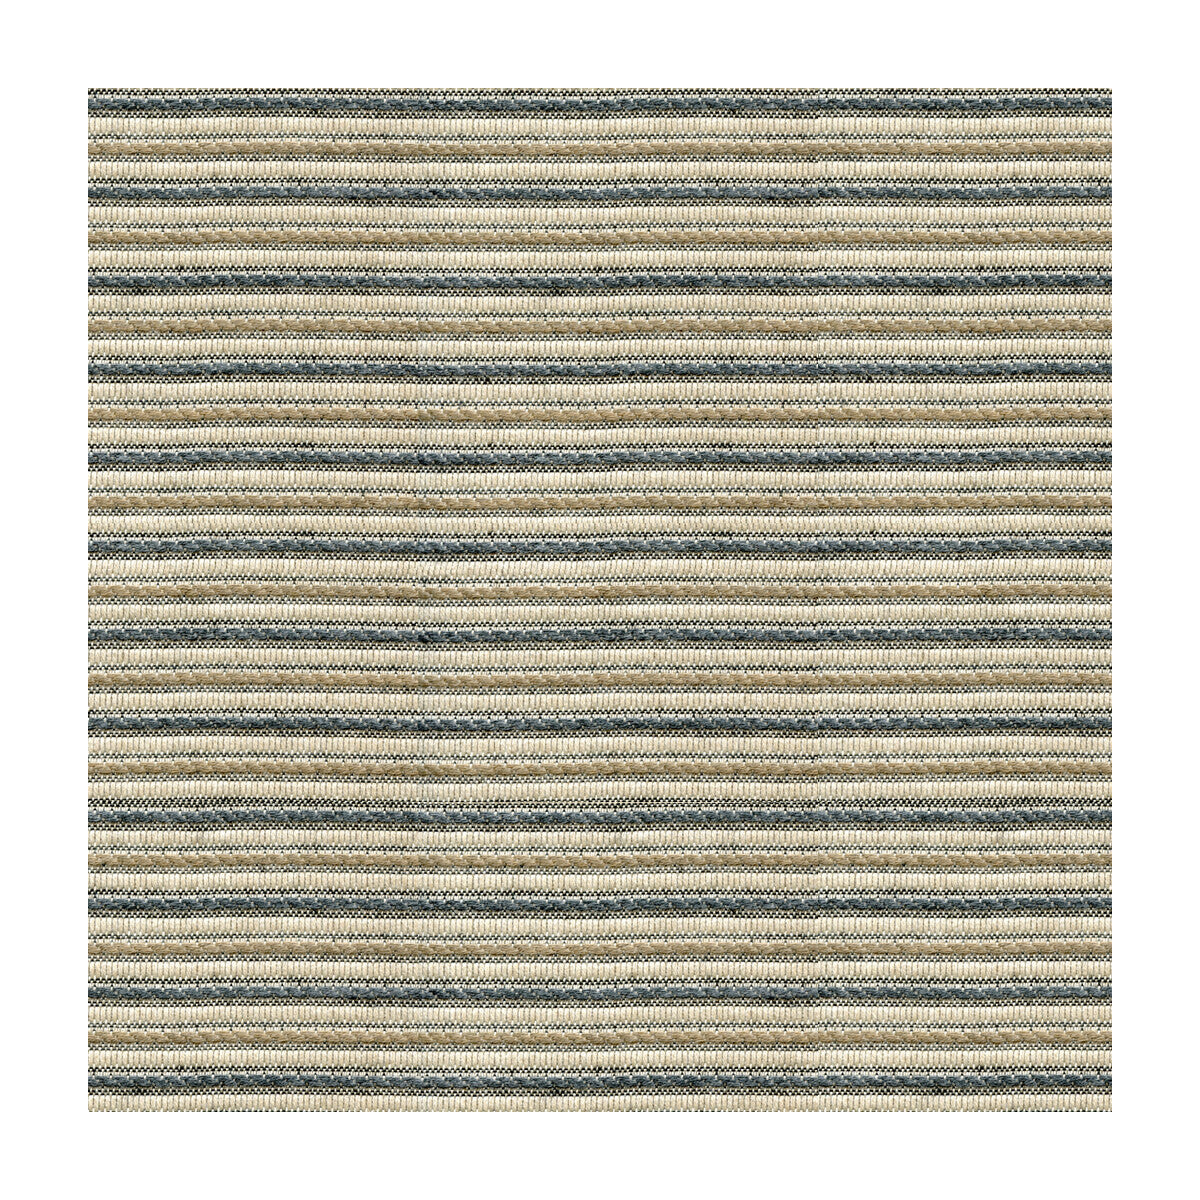 Passageway fabric in pebble color - pattern 34868.1621.0 - by Kravet Design in the Oceania Indoor Outdoor collection